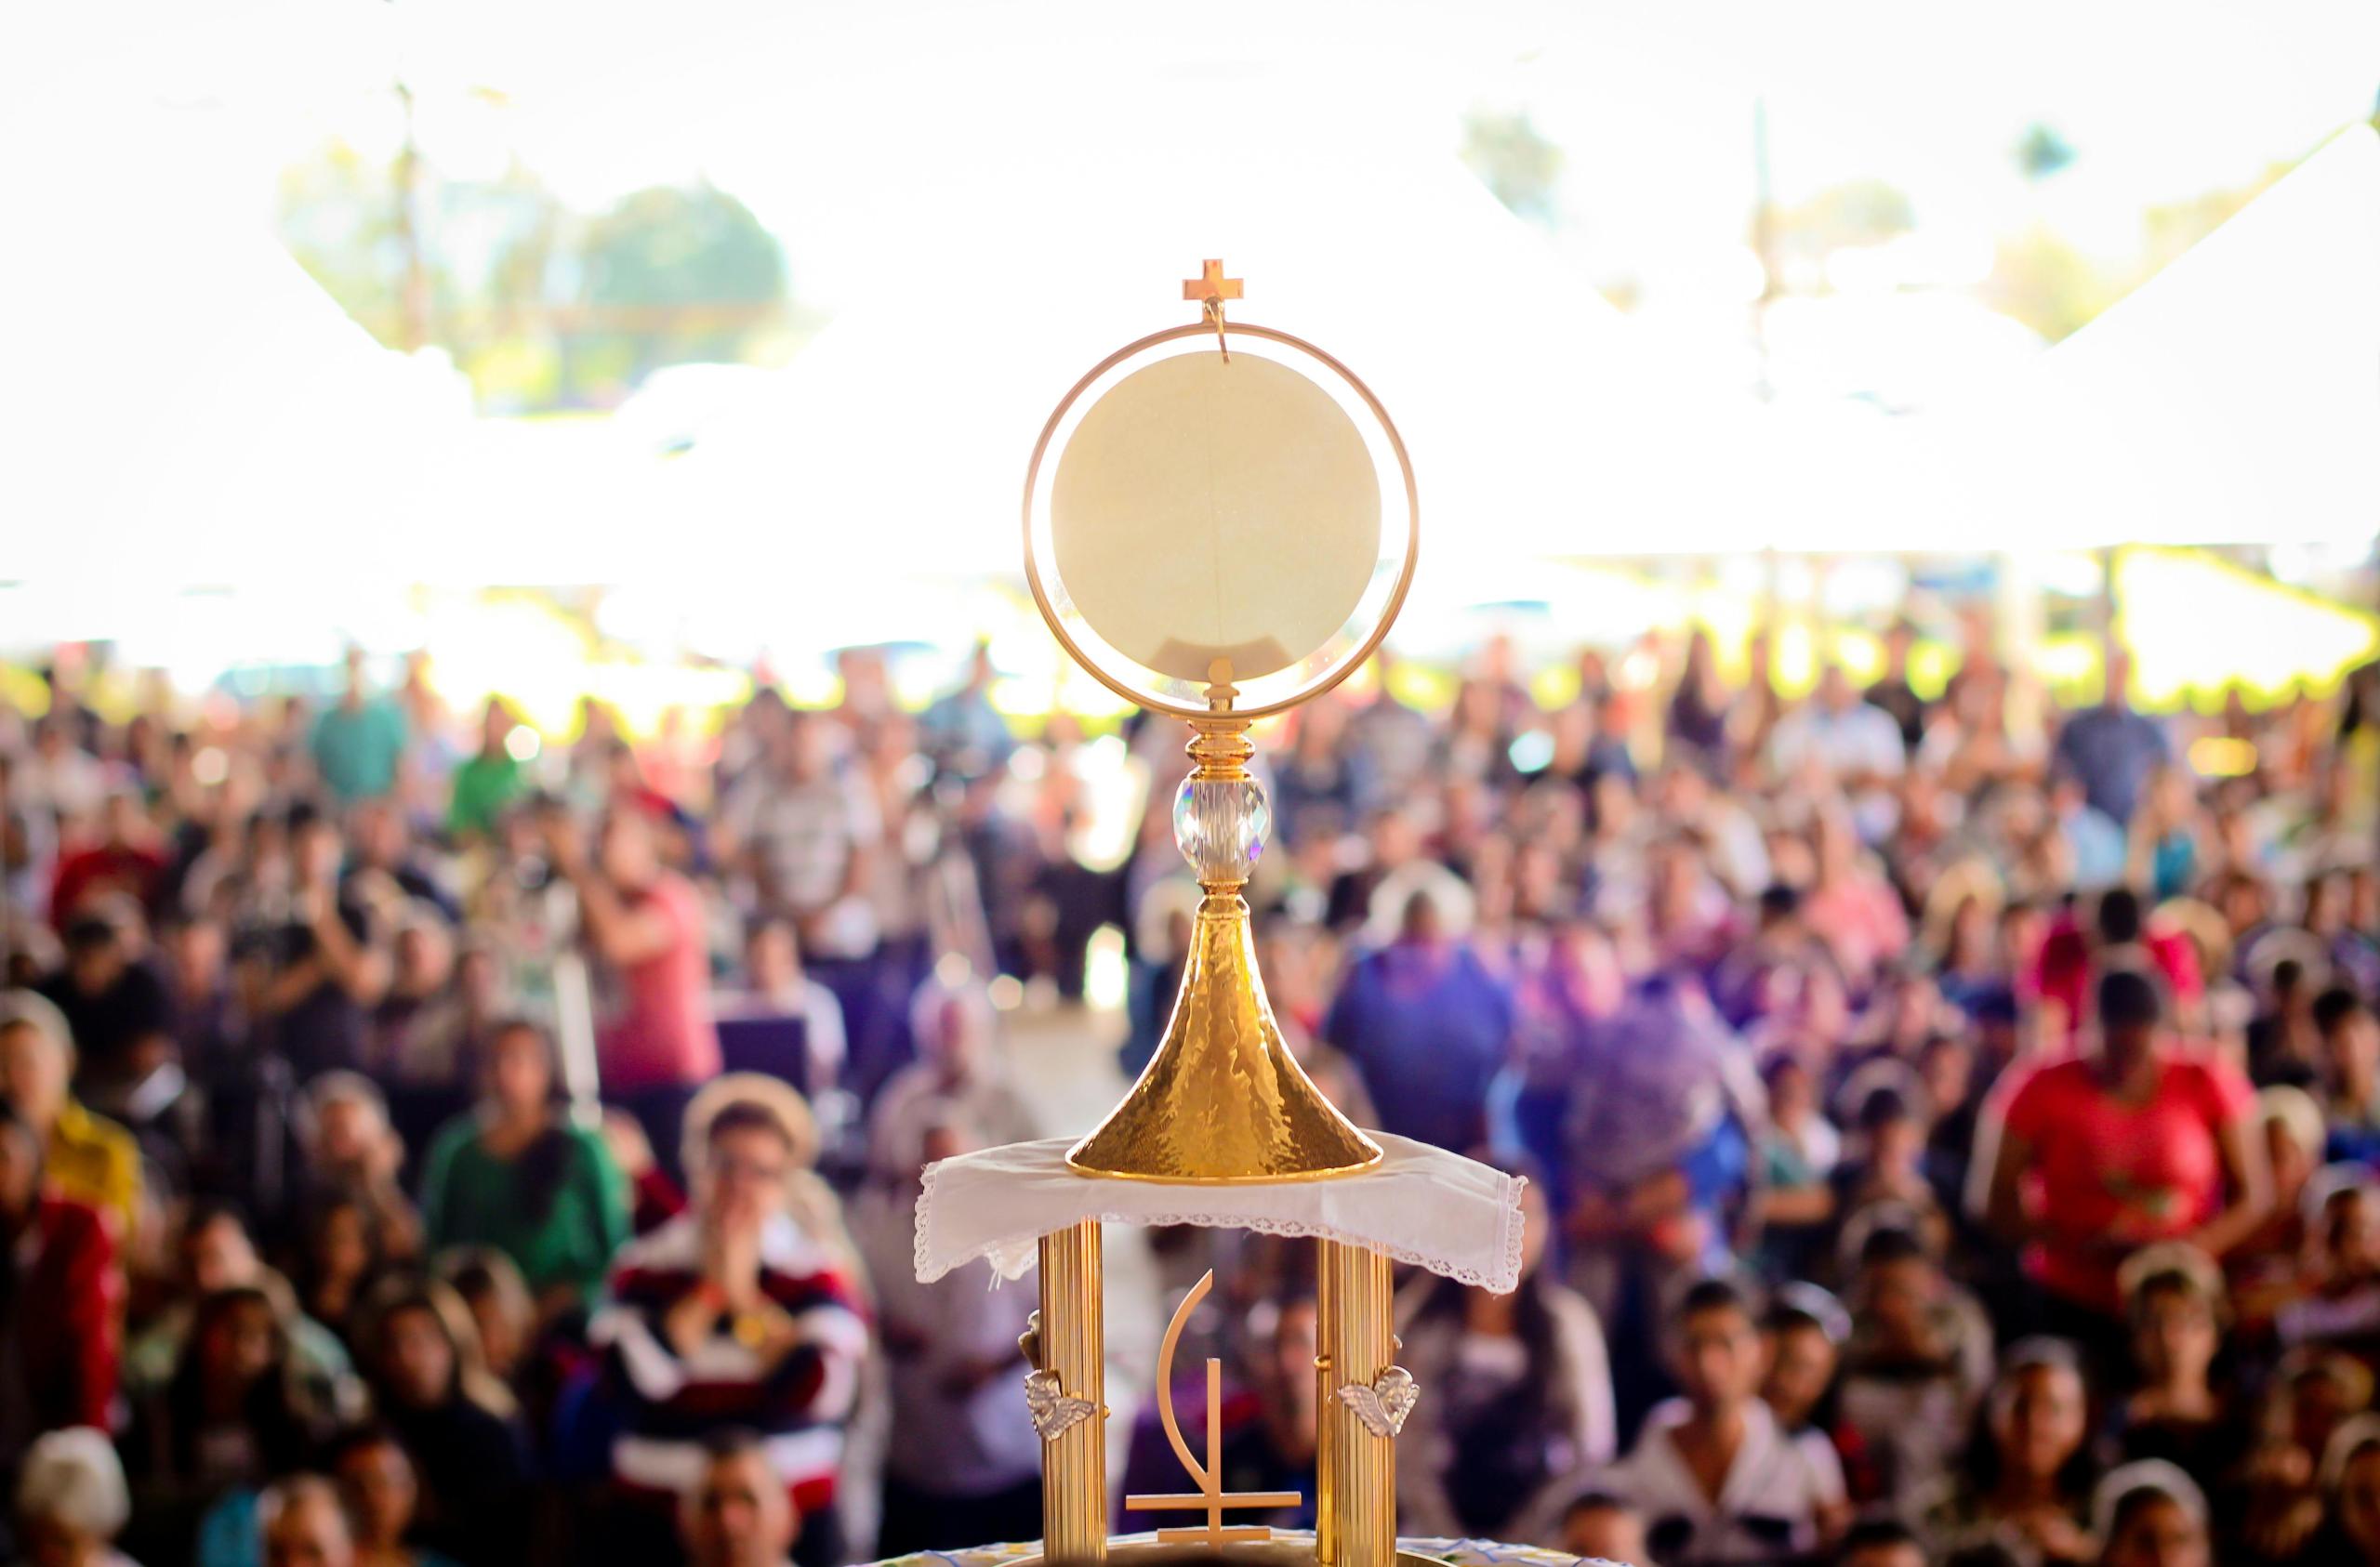 The Holy Eucharist on display for the people of Minas Gerais, Brazil.